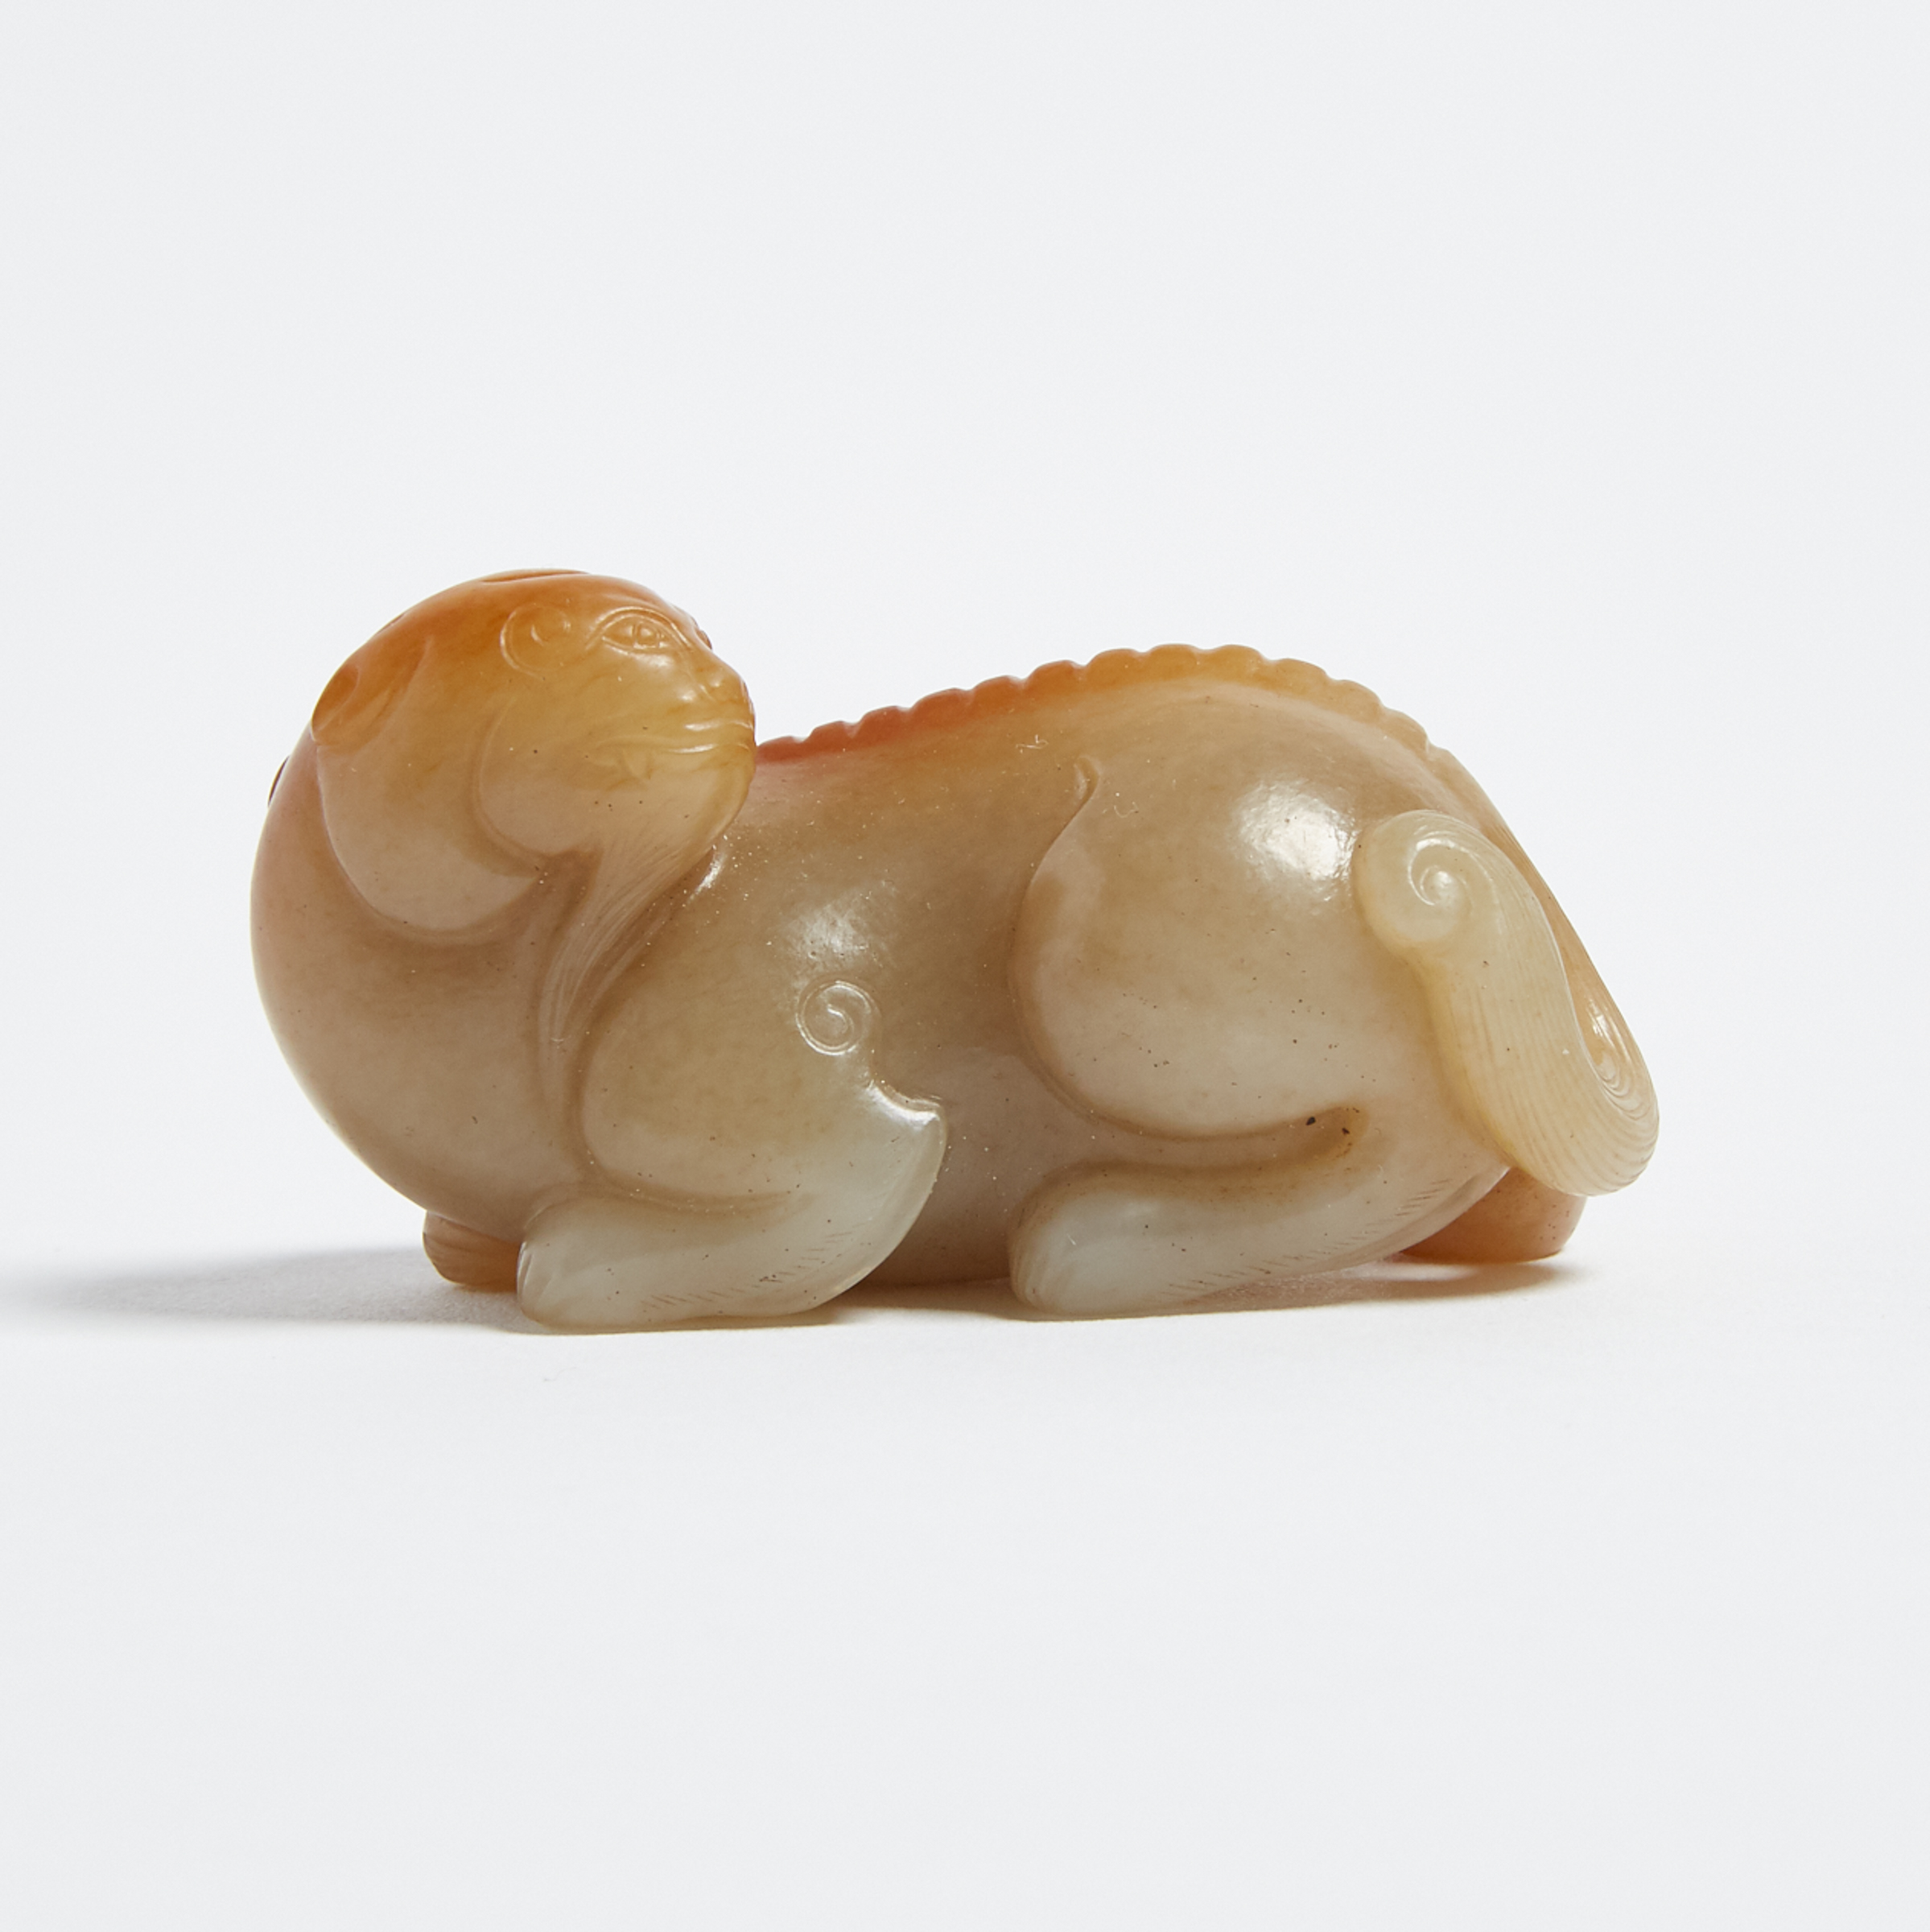 A Pale Celadon and Russet Jade Carving of a Lion